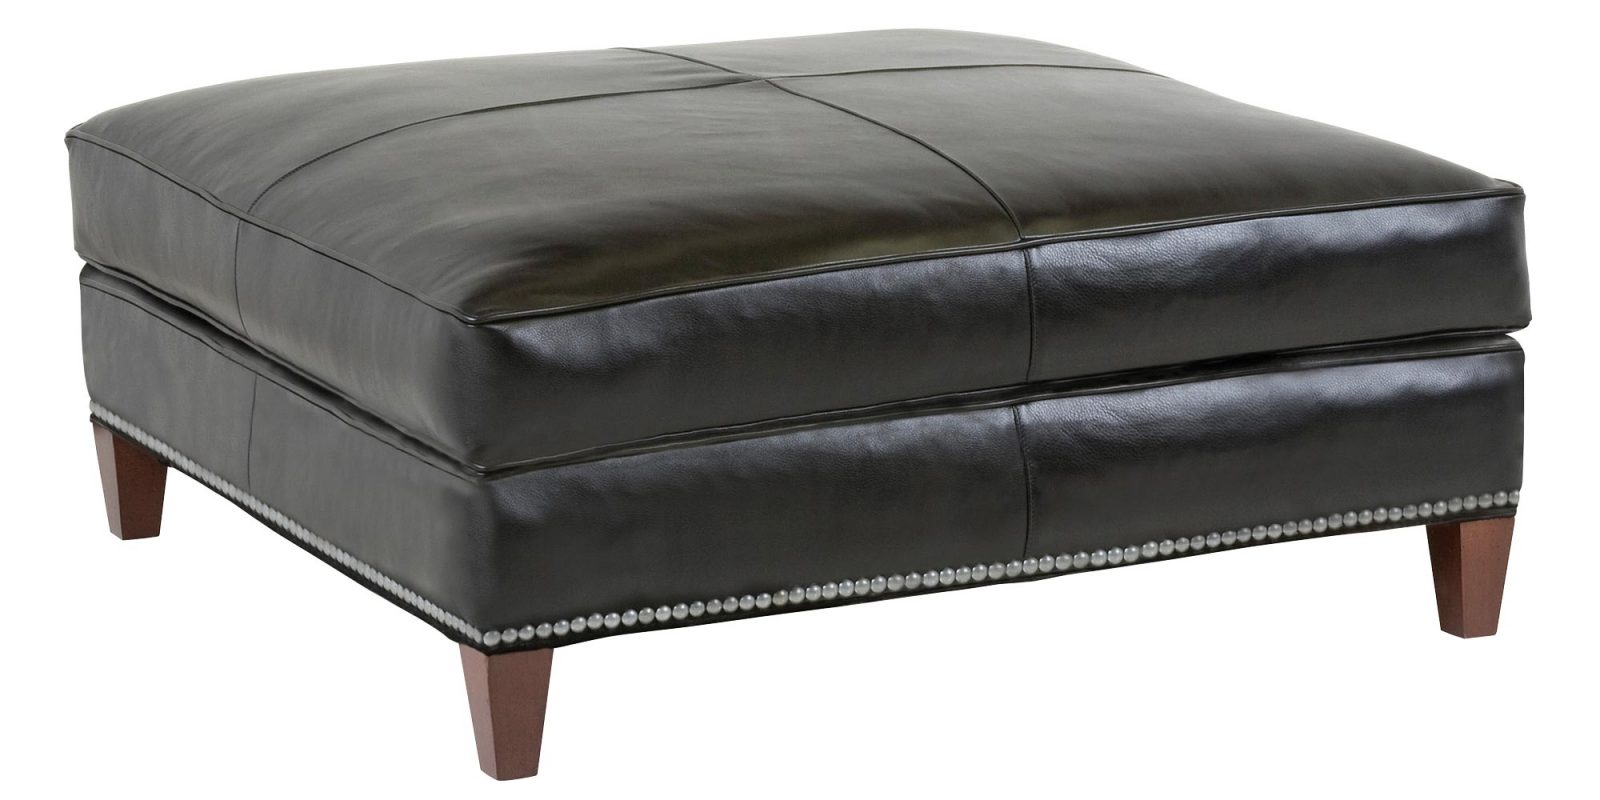 tufted leather ott coffee table best unique and creative square black with metal nail accent tray brown stai round storage pottery barn tables shelf bath beyond wedding registry